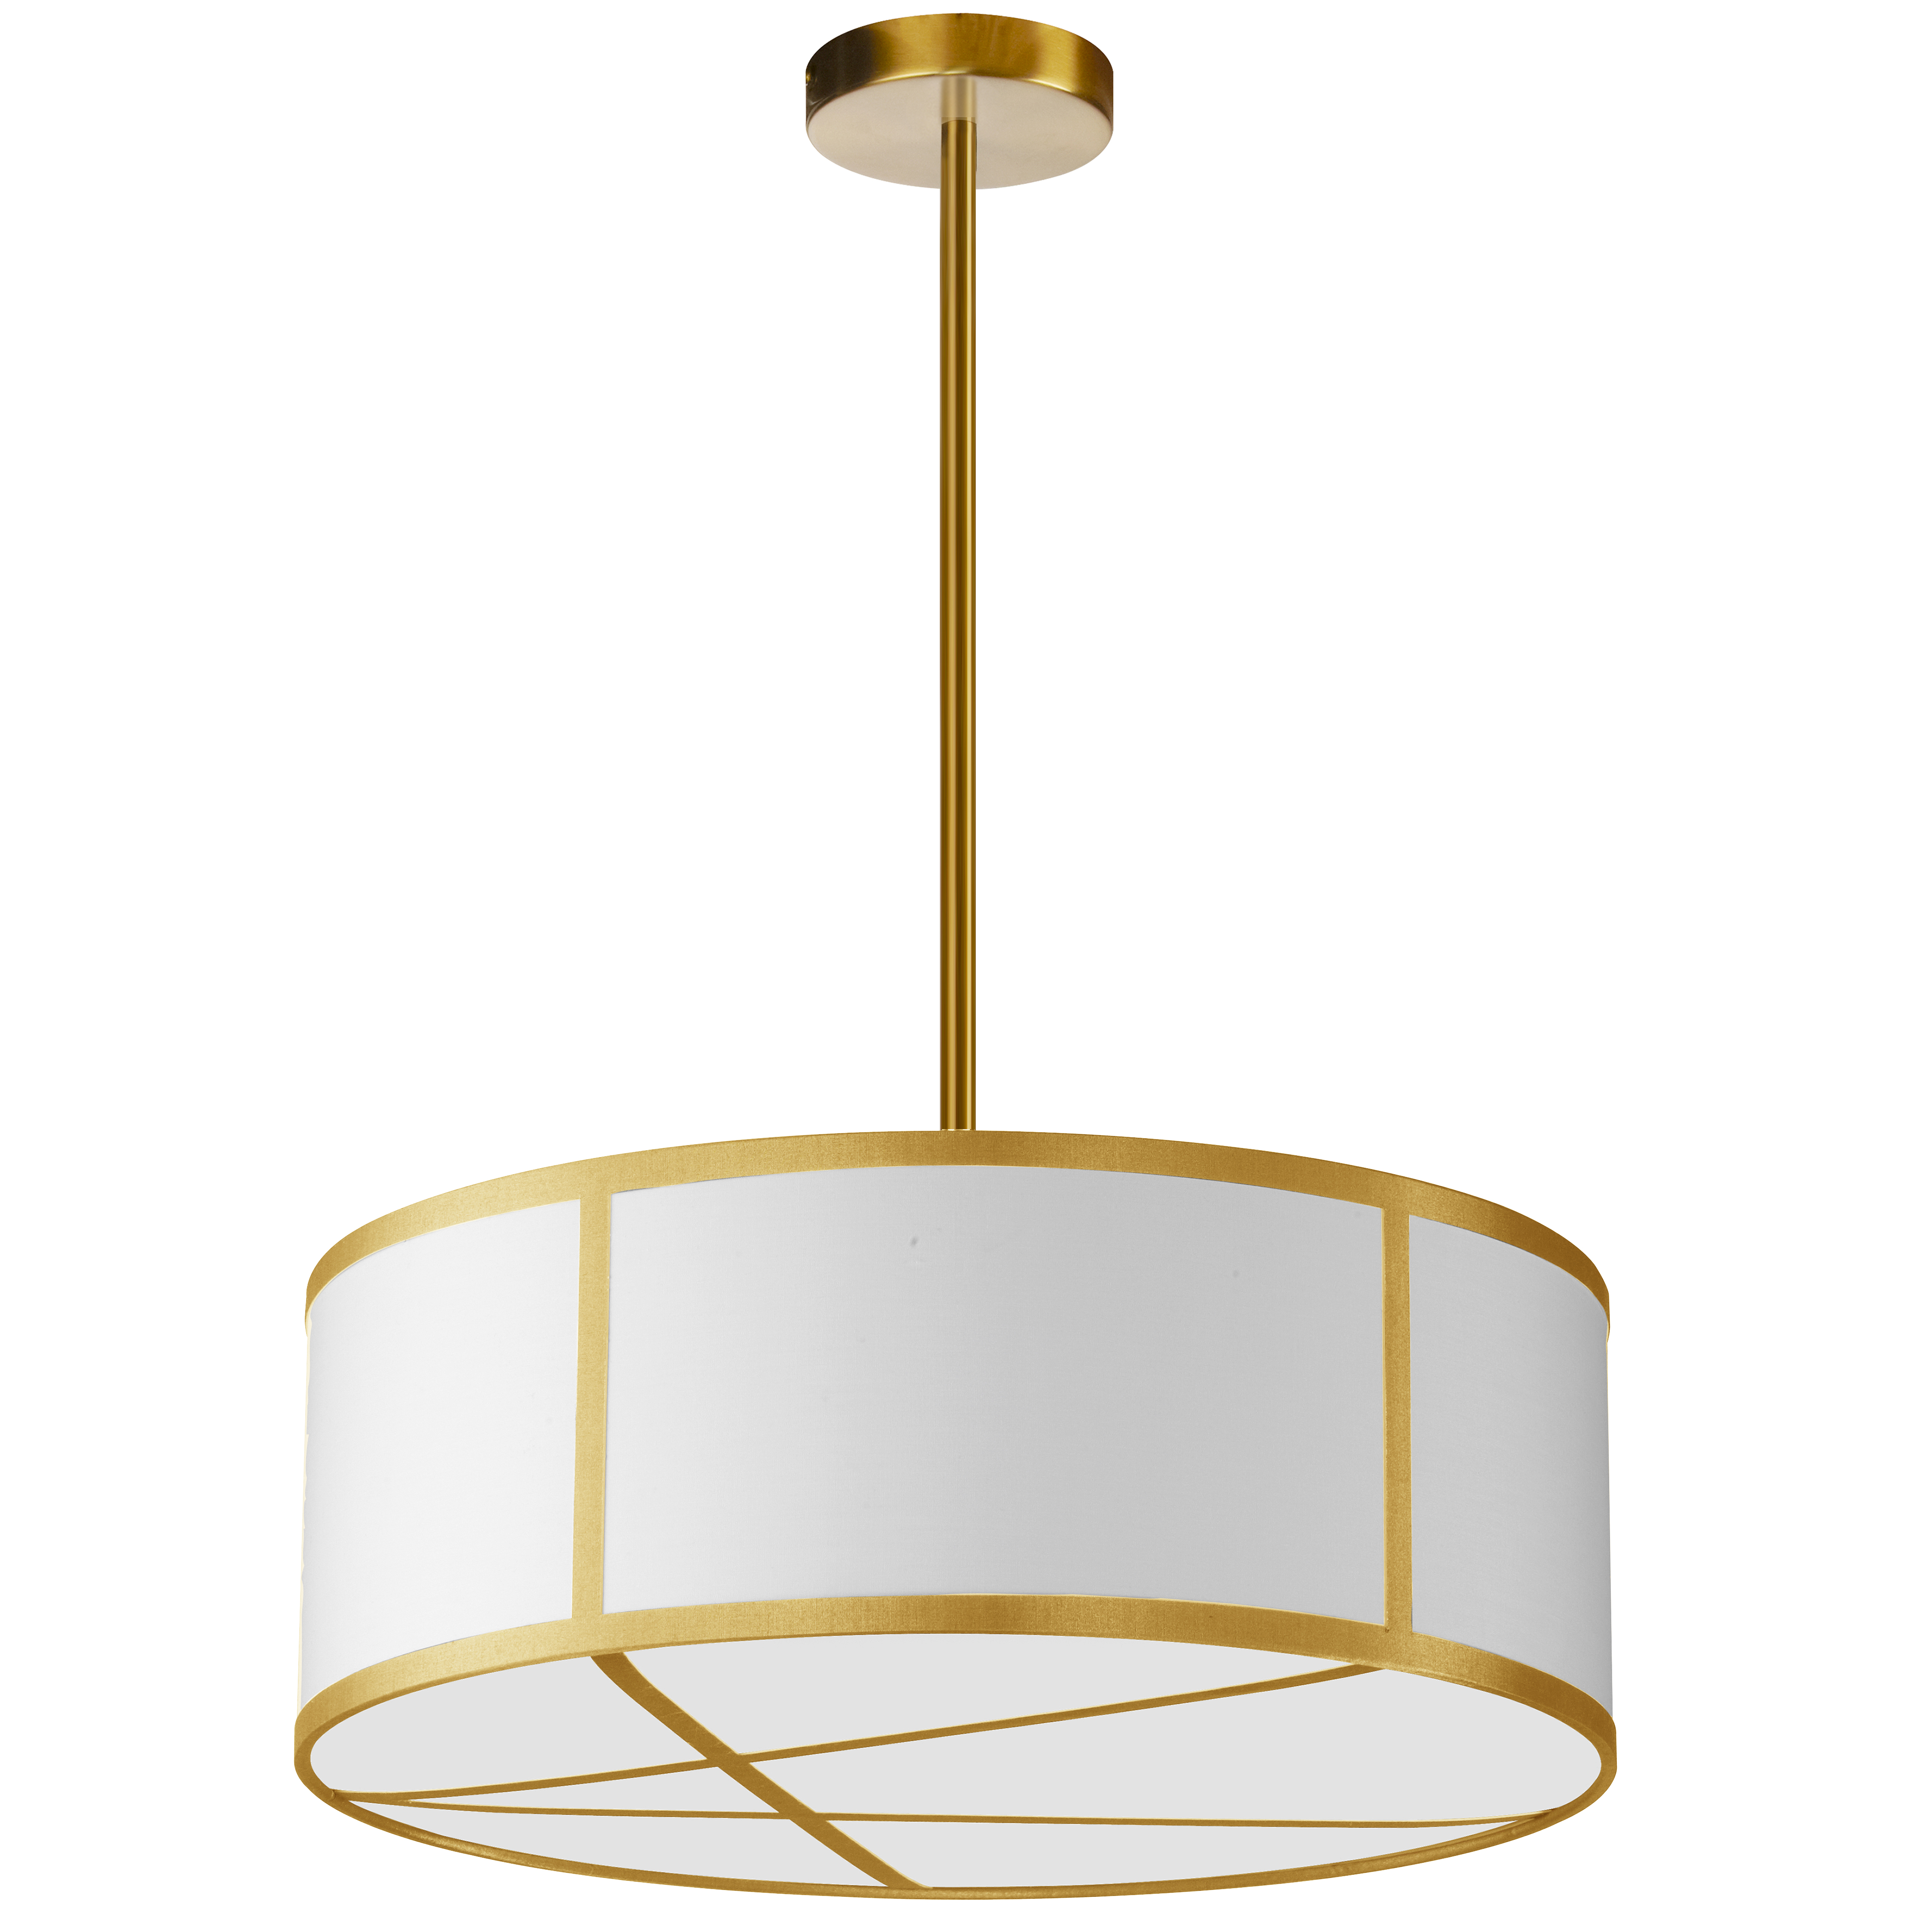 The classic drum style pendant gets a chic makeover in the Pernia family of lighting. The fashionable design, based on contrasts and linear appeal, will draw attention while complementing your contemporary décor. The metal frame in a choice of finishes creates the linear design around and below the fabric drum shade, available in a range of colors that create an eye-catching contrast. Pernia lighting offers your home a stylish look that will enhance your foyer, living room or dinette.